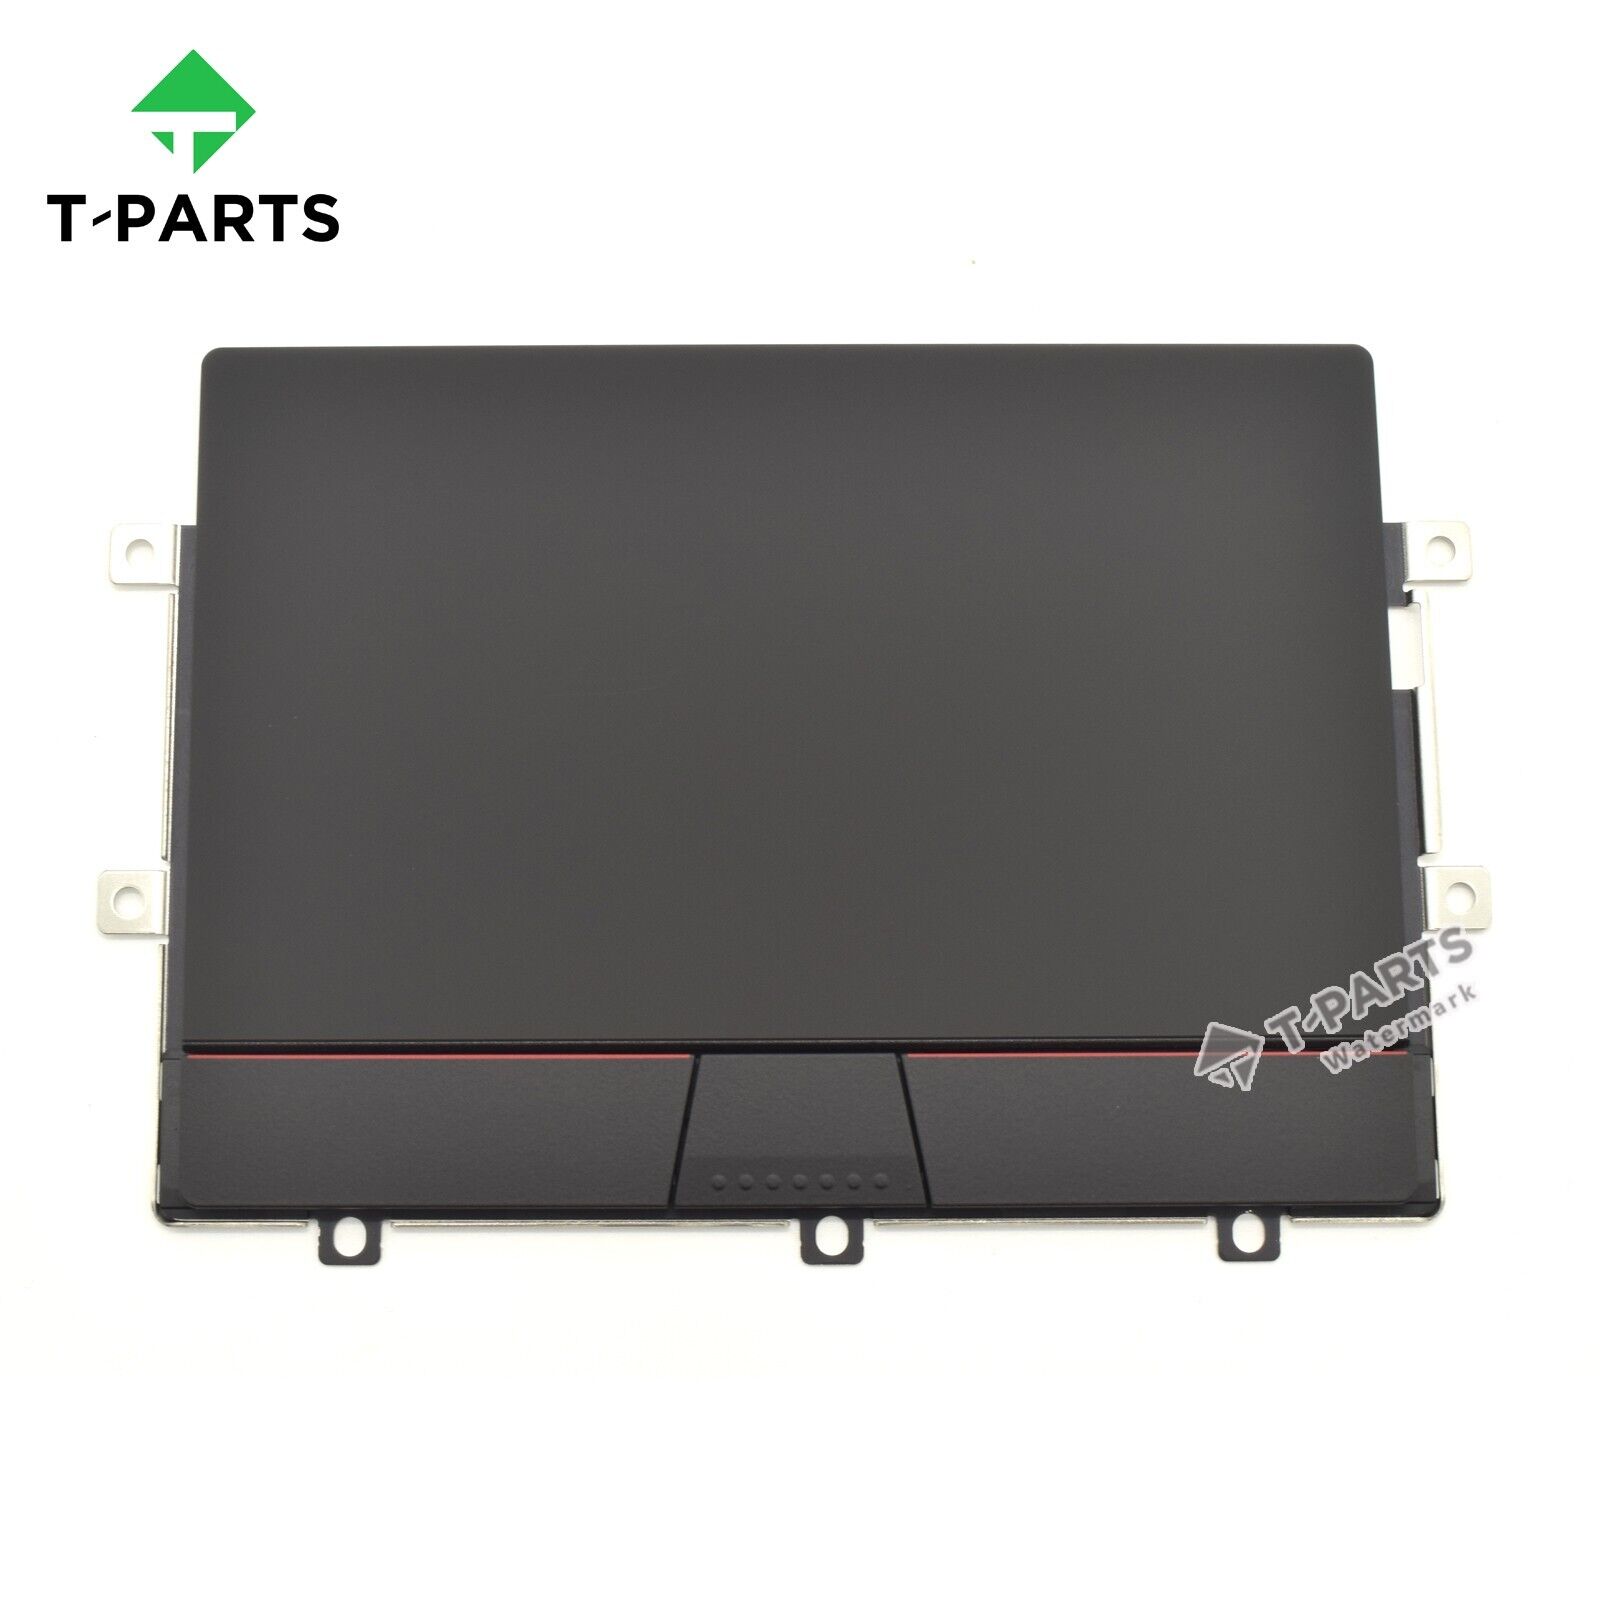 Touchpad Clickpad Trackpad Glass For Lenovo ThinkPad X1 Extreme 4th Gen P1 Gen 4